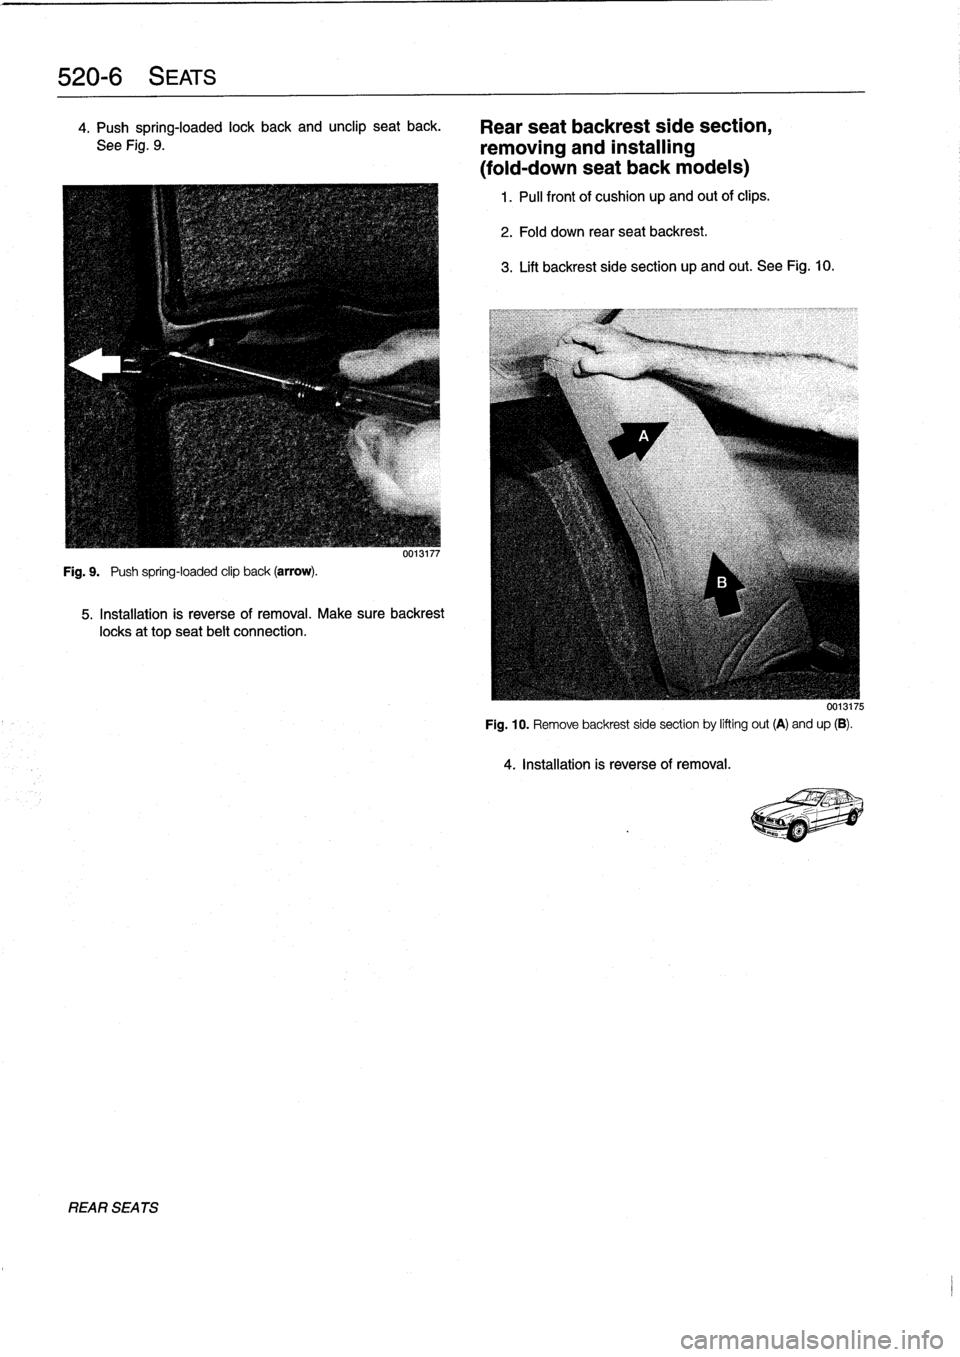 BMW 318i 1998 E36 Service Manual 
520-
6
SEATS

4
.
Push
spring-loaded
lock
back
and
unclip
seat
back
.

See
Fig
.
9
.

Fig
.
9
.

	

Push
spring-loaded
clip
back
(arrow)
.

UU13117

5
.
Installation
is
reverse
of
removal
.
Make
sure